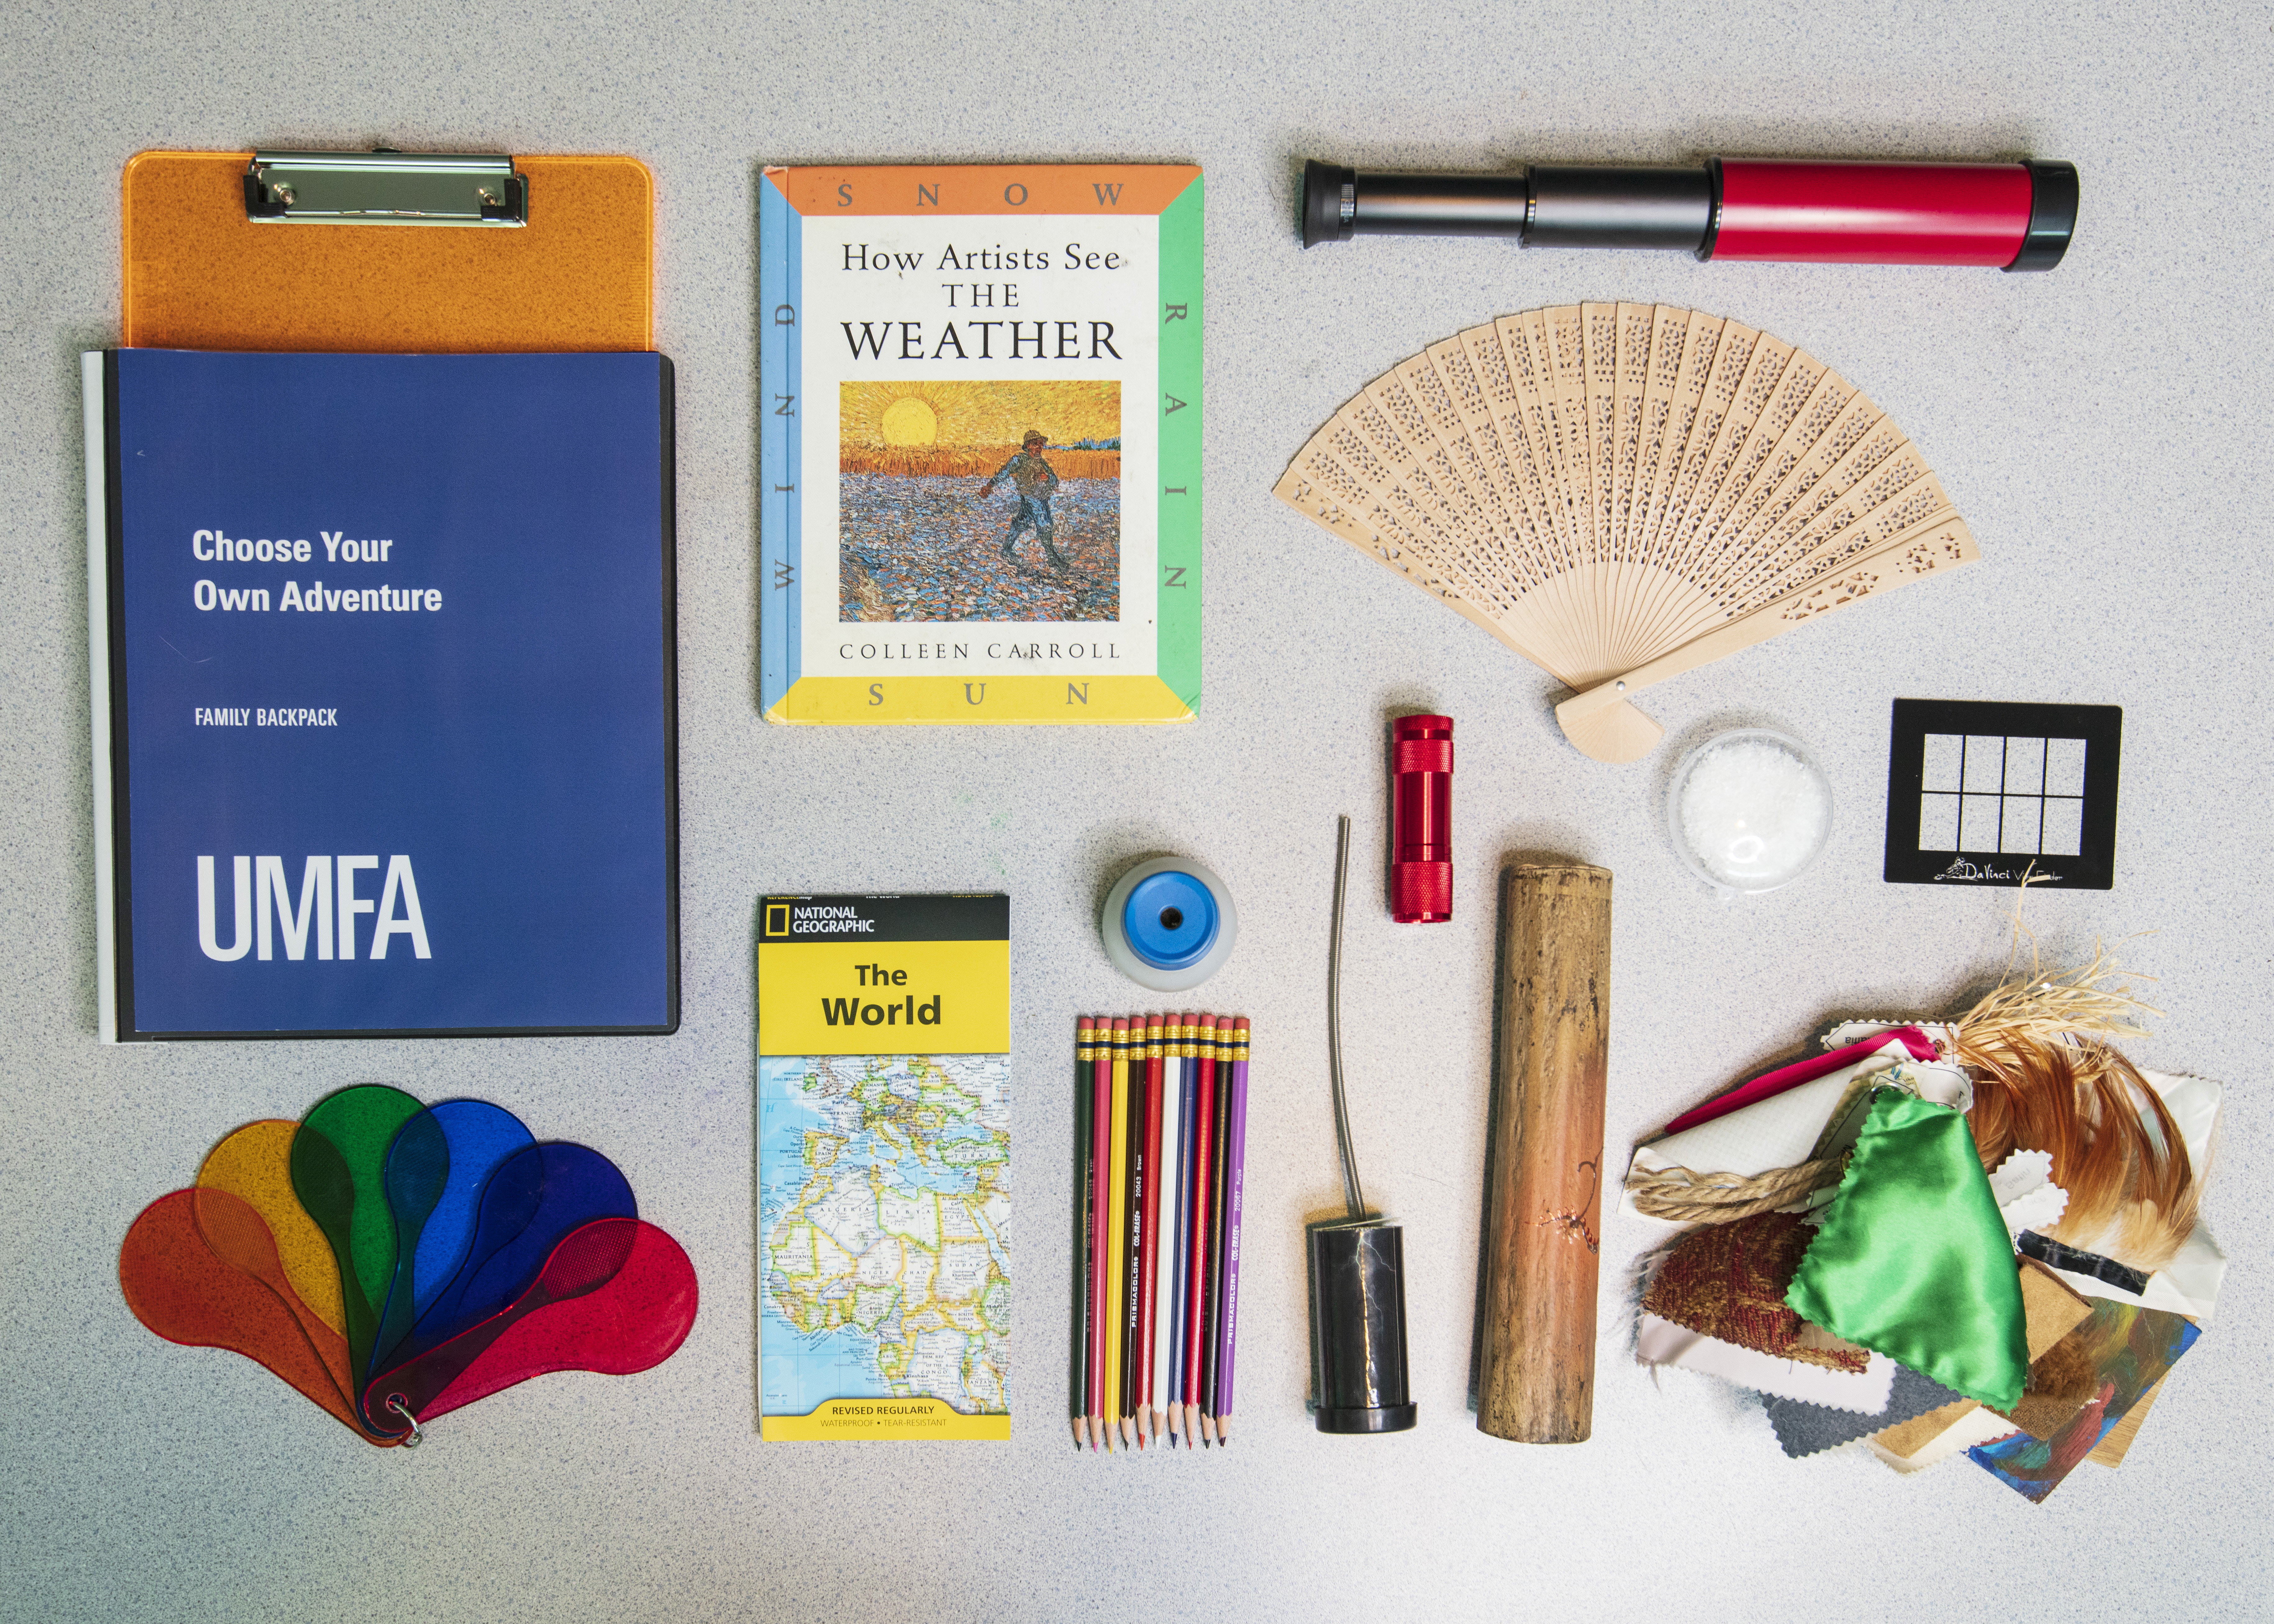 The contents of a UMFA sensory backpack laid out. There is a map, a telescope, color swatches, a bundle of different fabrics and textures, pencils, and more.